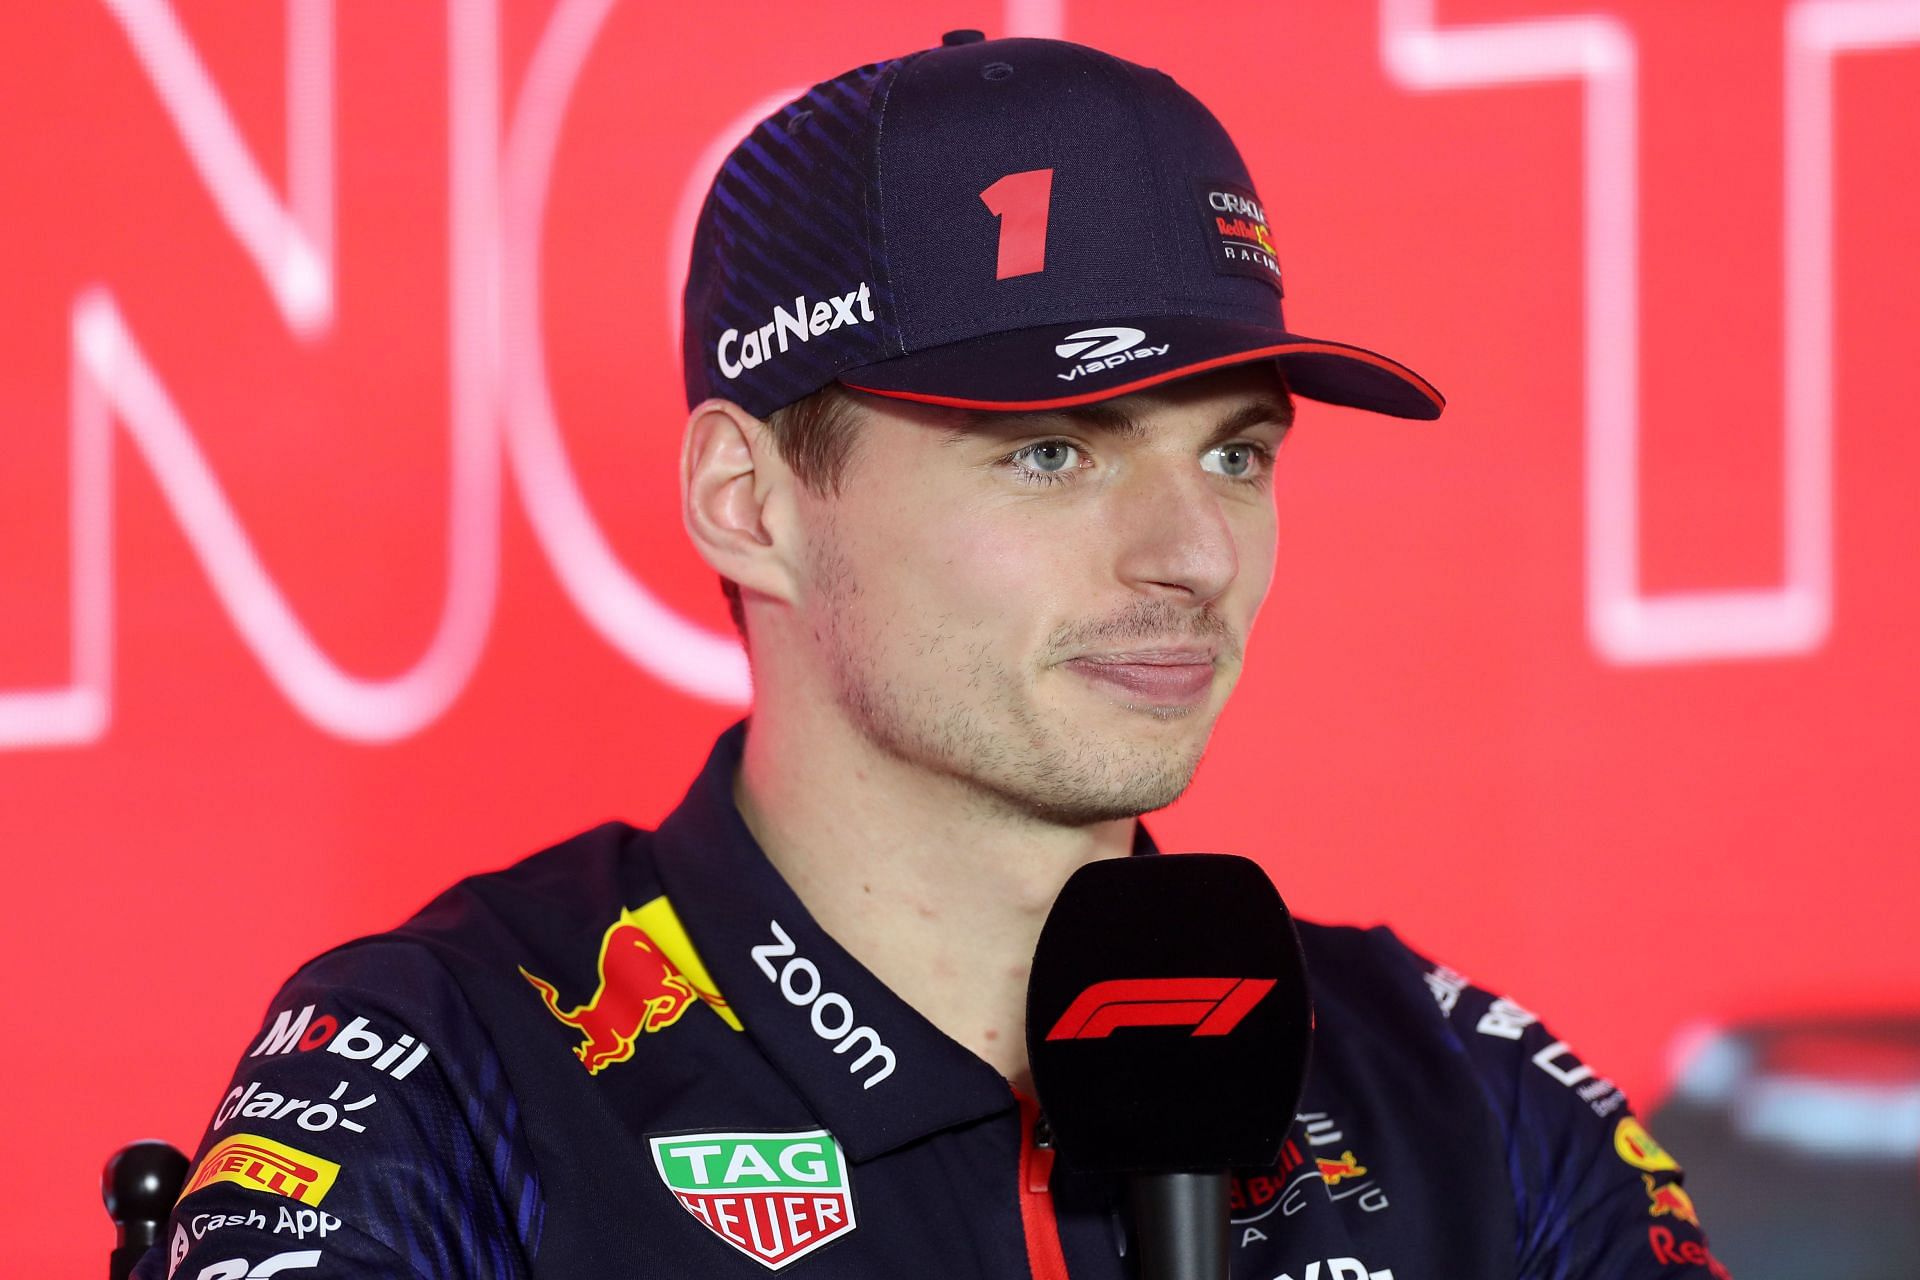 Red Bull RB19 F1 Car Breaks Cover and Max Verstappen Can't Tell It Apart  from the RB18 - autoevolution